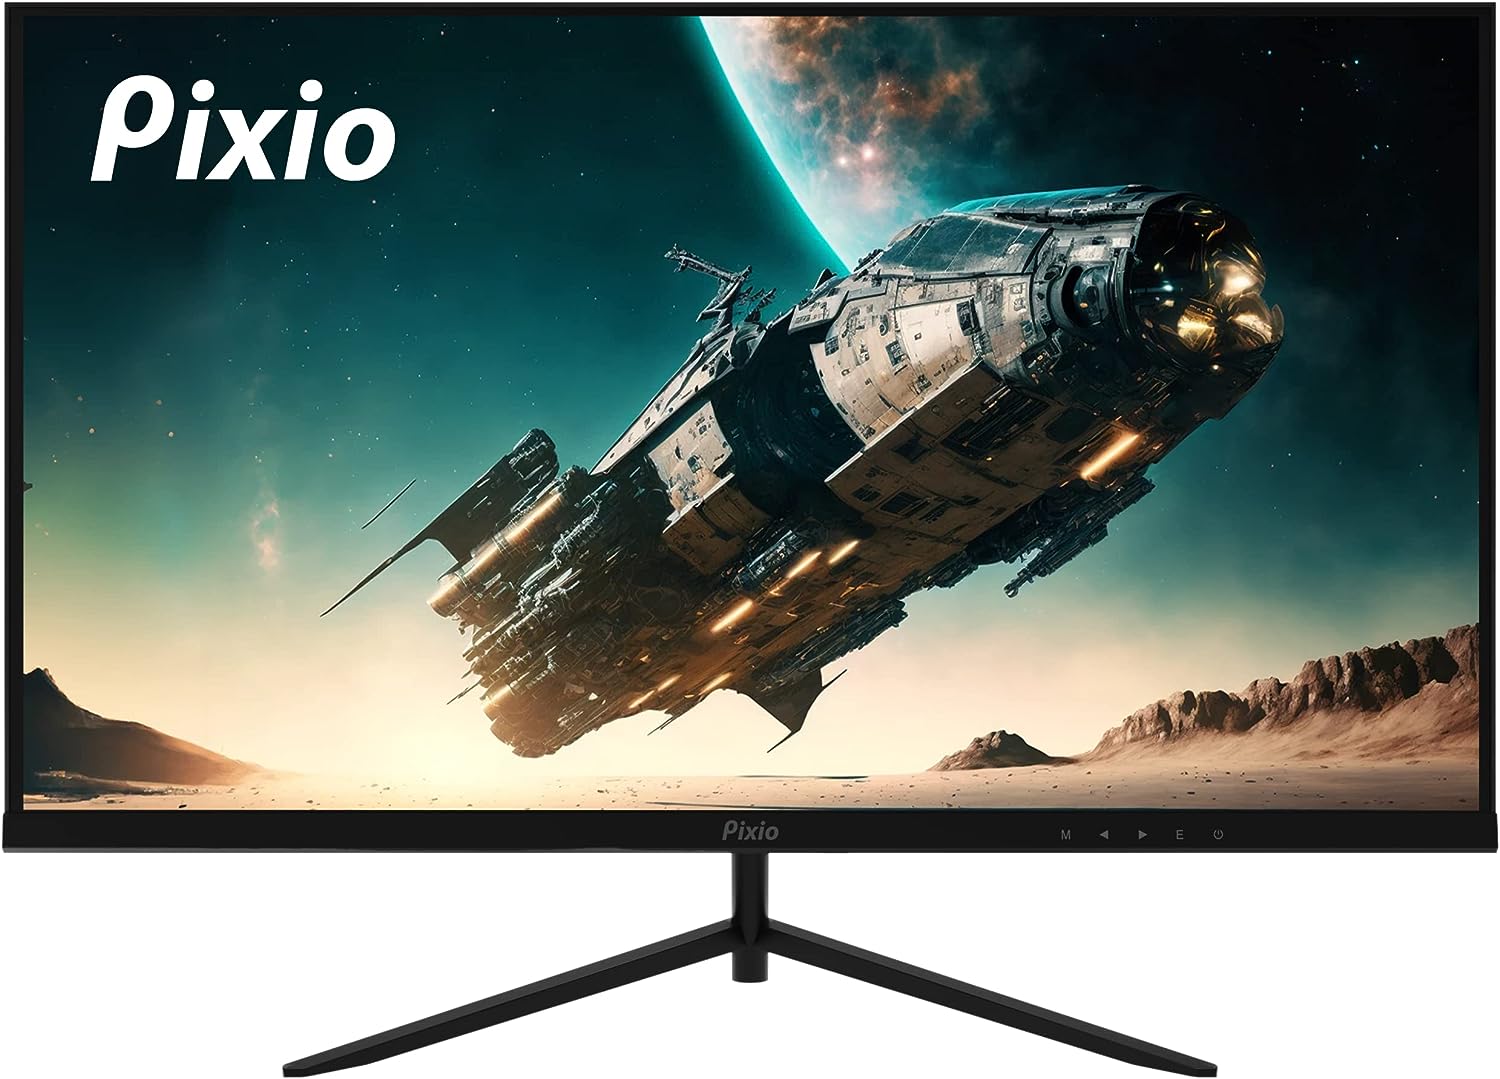 Pixio PX222 Gaming Monitor Review